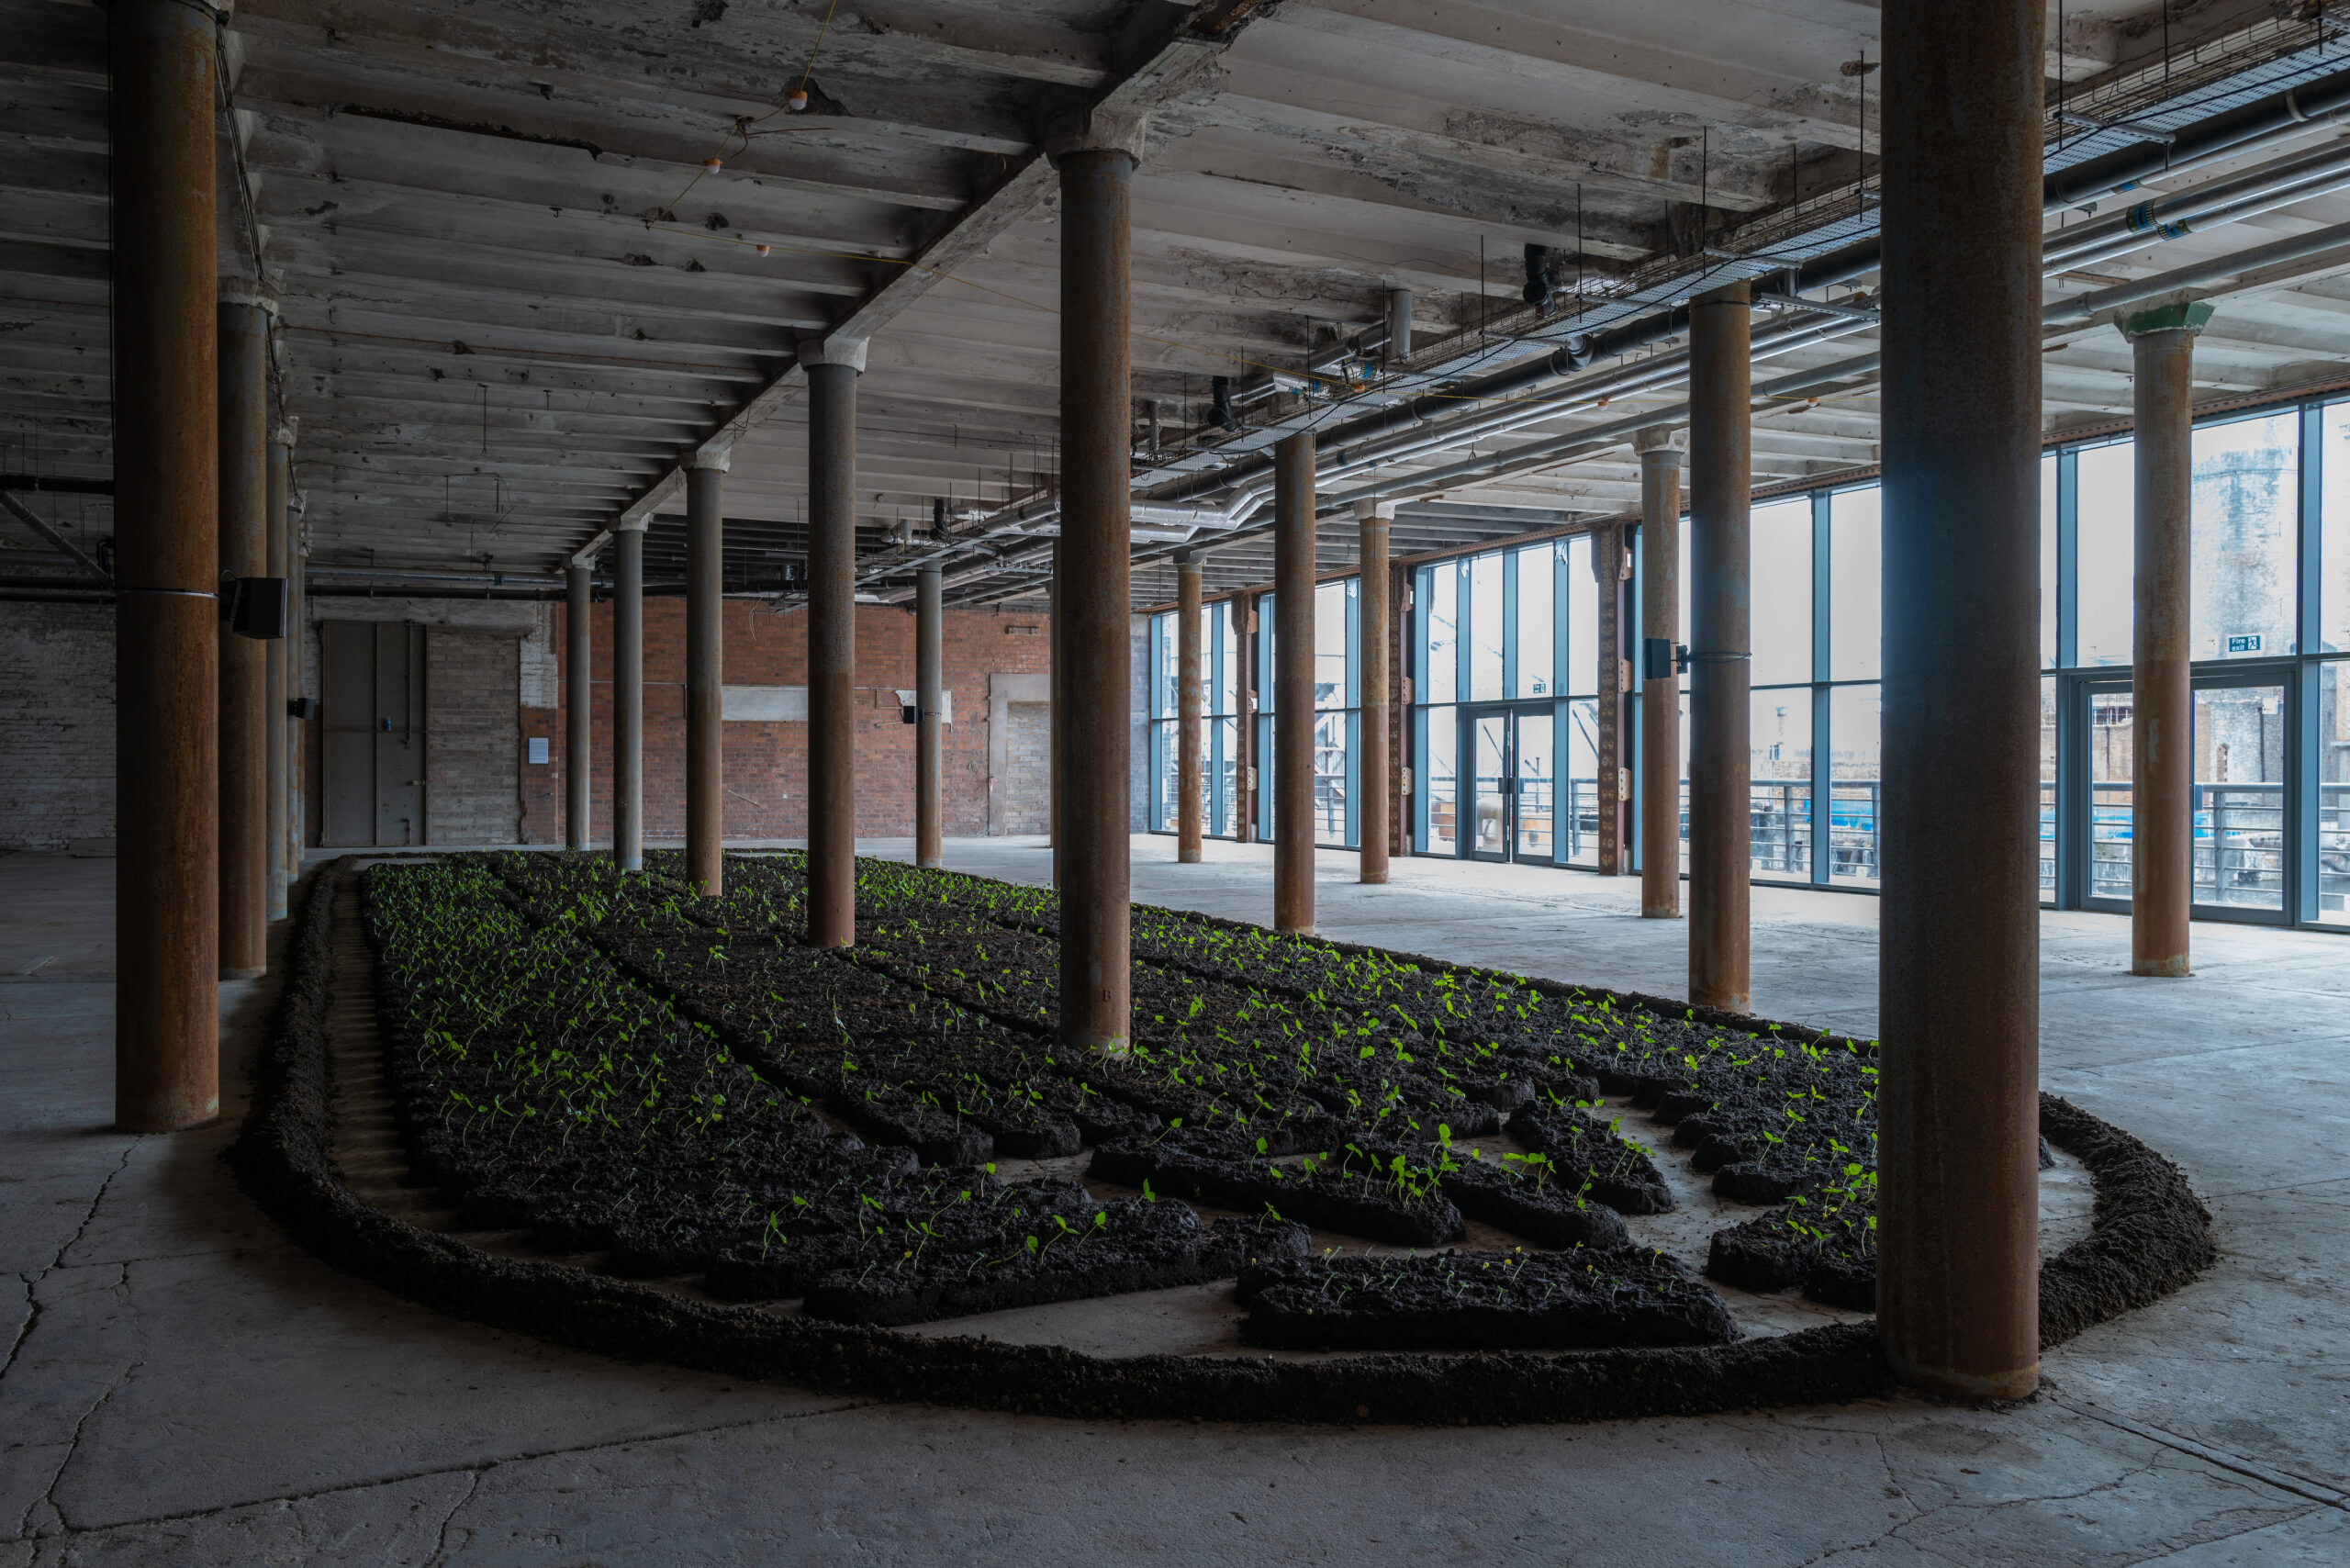 In a large concrete room filled with columns supporting the roof, a large oval of dirt occupies most of the floor space. Green plants are sprouting out of the dirt.